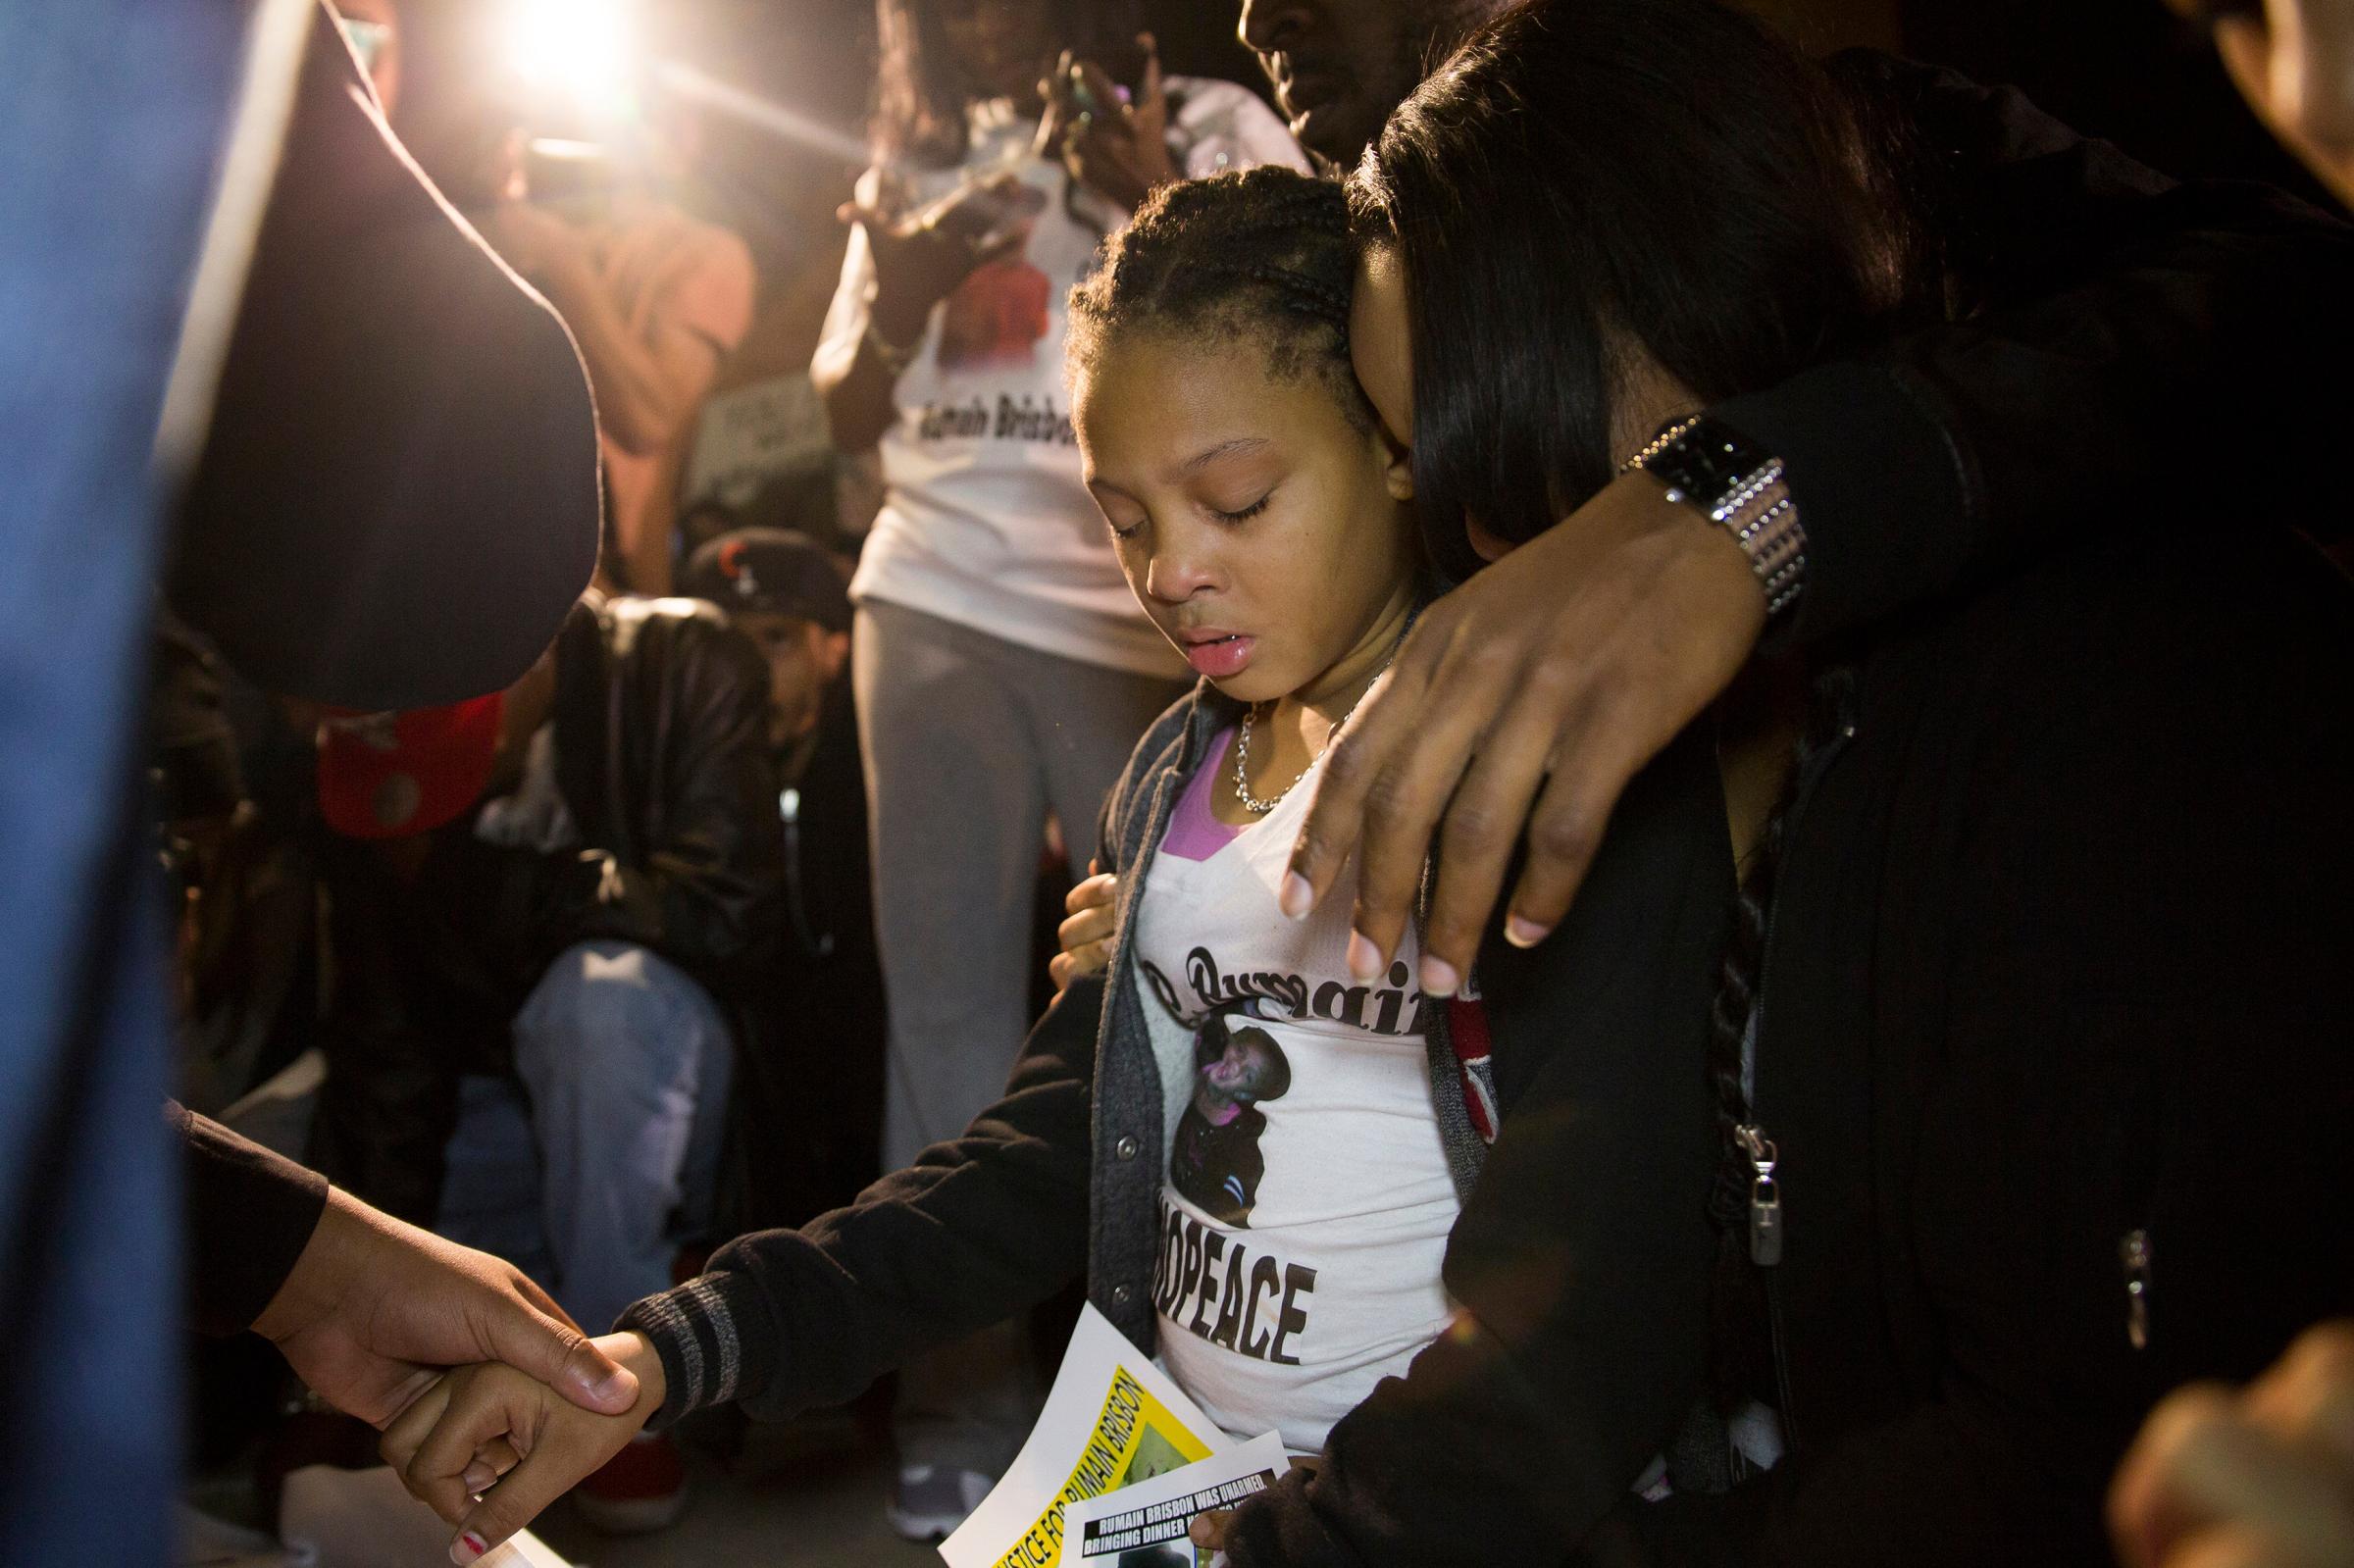 The daughter of Rumain Brisbon (L) begins crying as she kneels in prayer at a vigil for her father who was fatally shot by police, in Phoenix, Ariz. on Dec. 8, 2014.